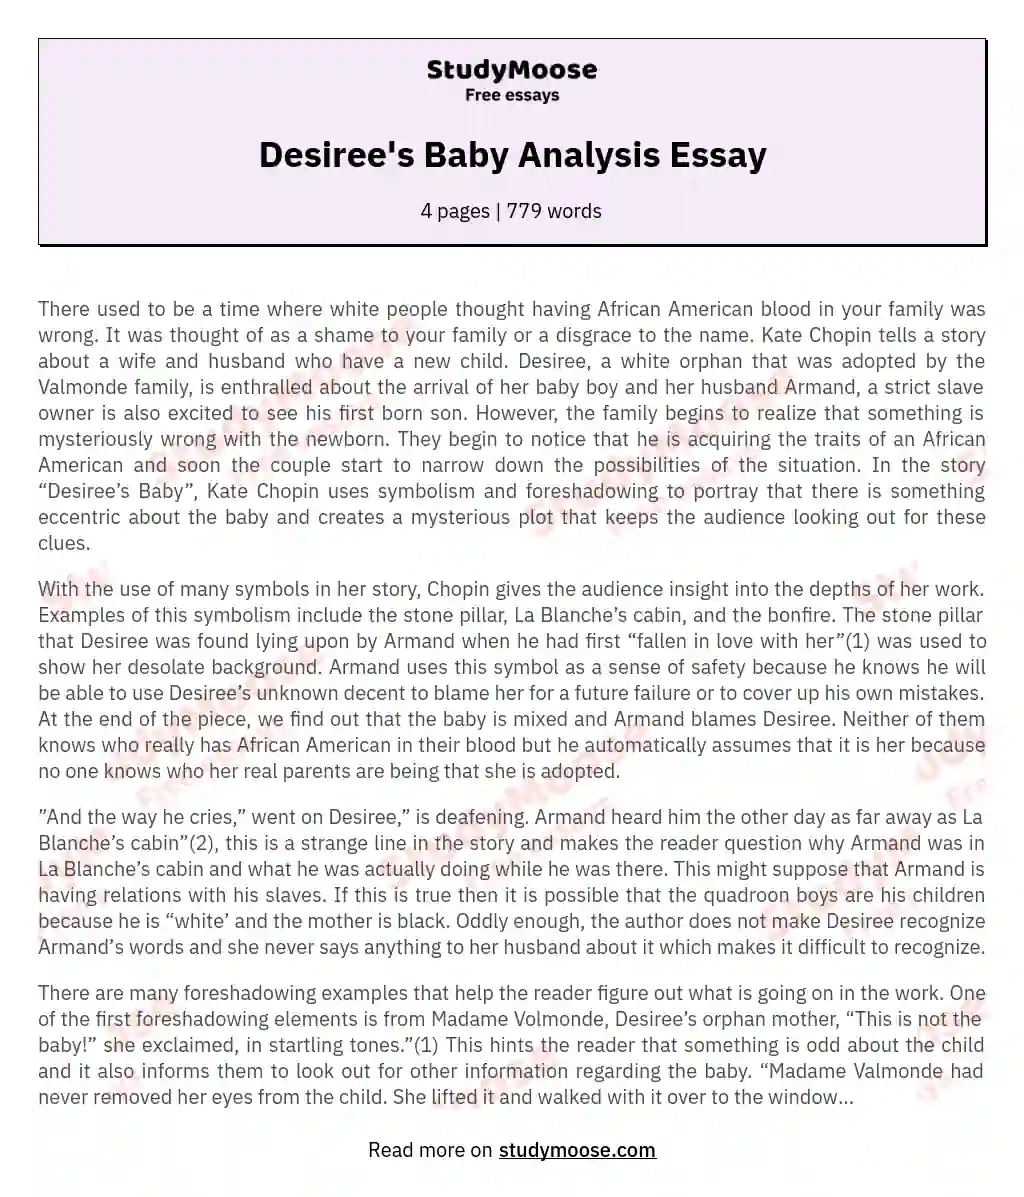 Exploring Race, Identity, and Prejudice in Kate Chopin's 'Desiree's Baby essay